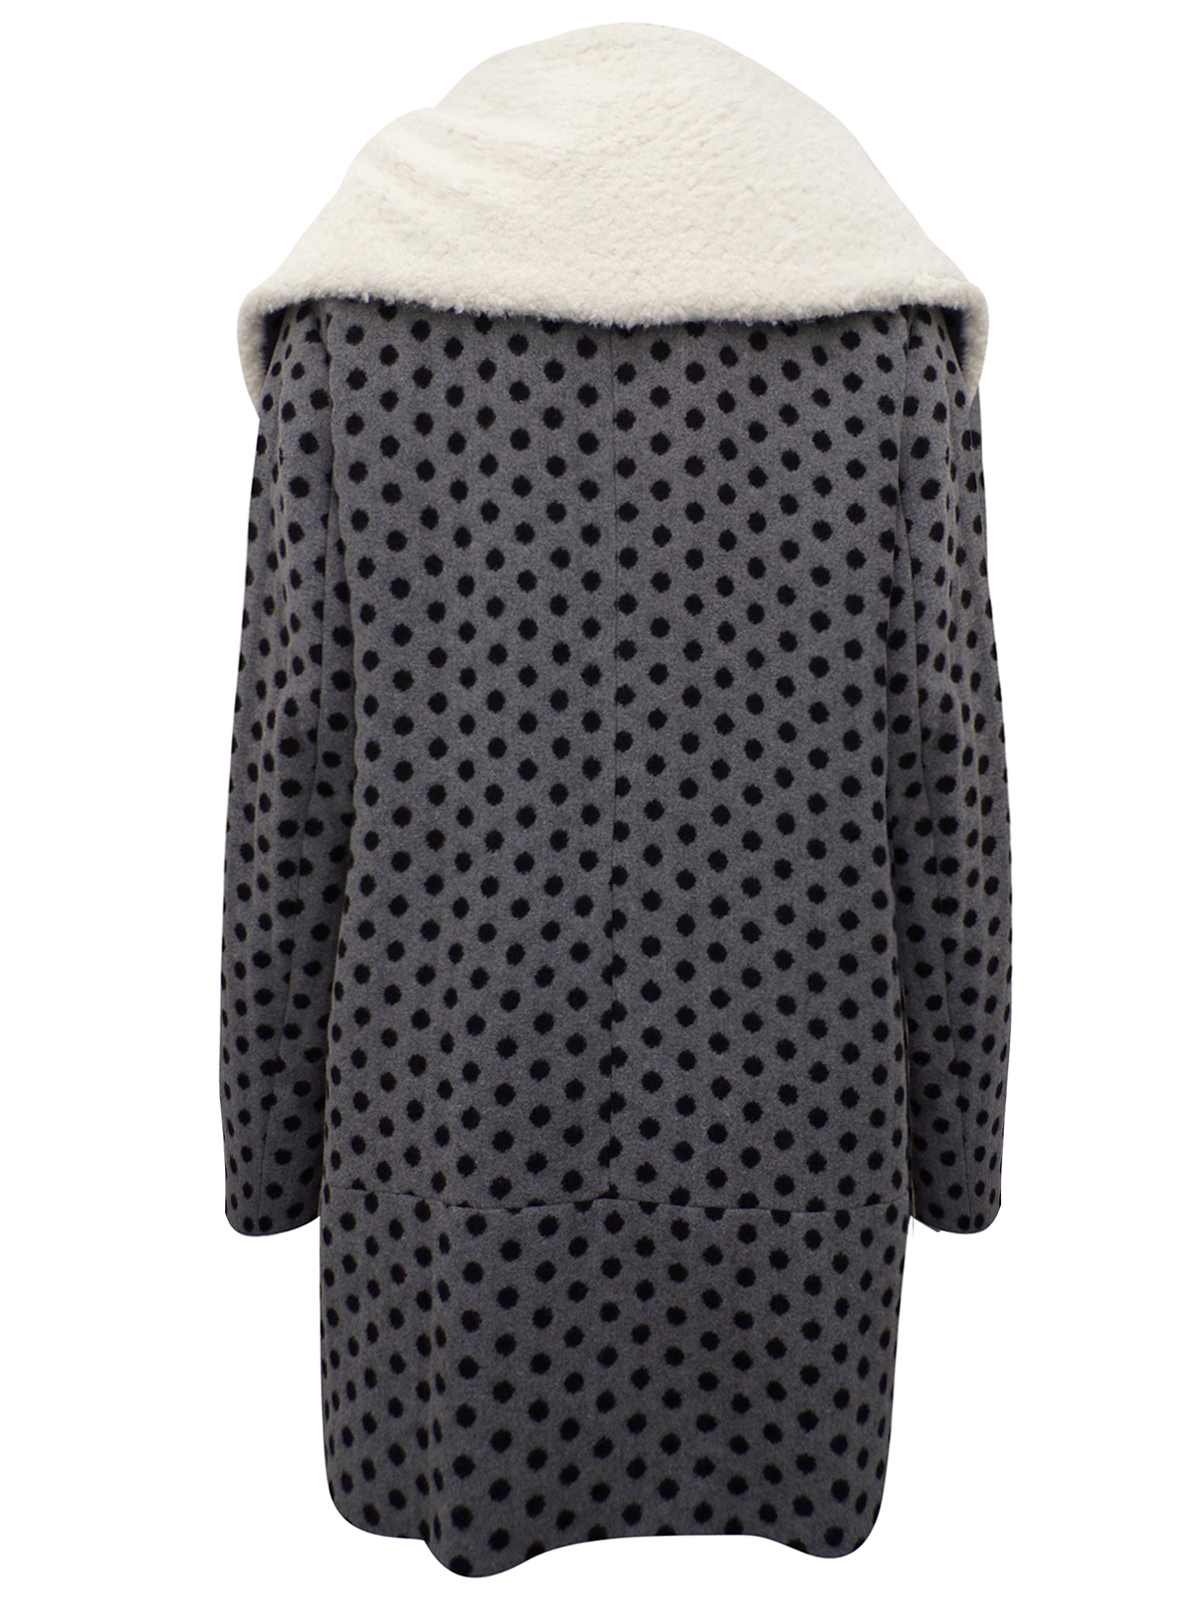 Principles - - Principles GREY Oversized Shawl Collar Spotted Coat with ...